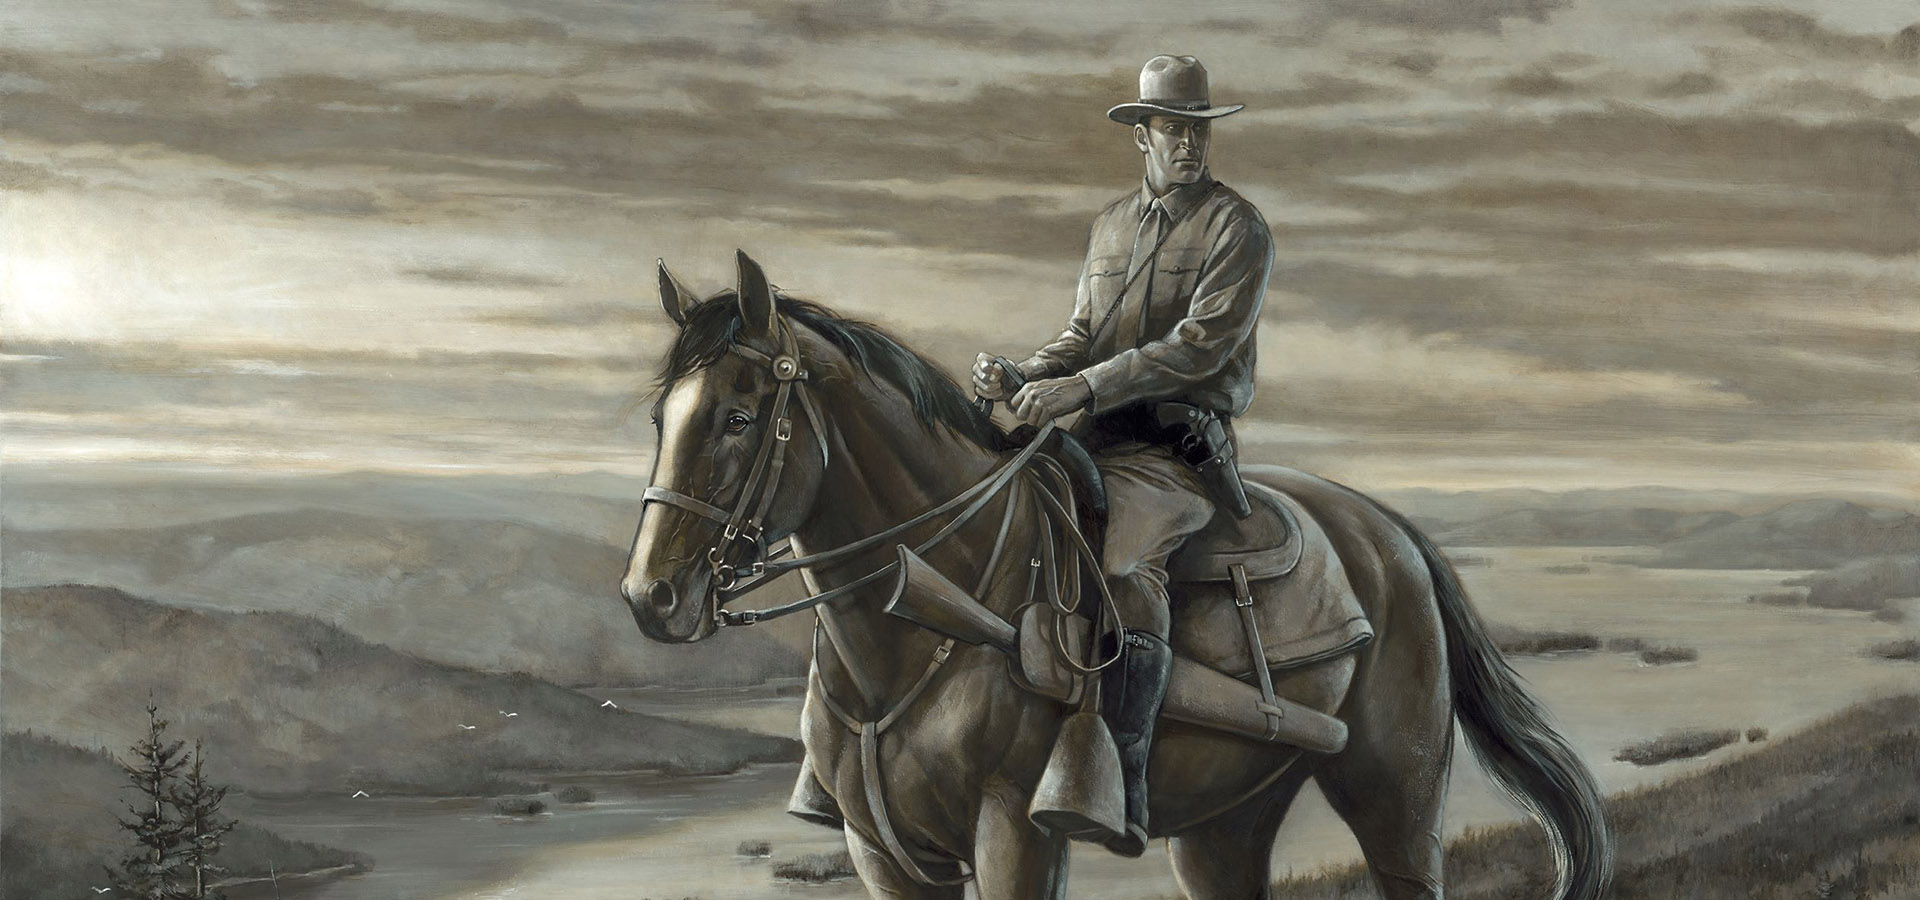 "First Patrol" painting by Brian Fox depicts a NYS Trooper riding a horse with mountains and a lake in the background